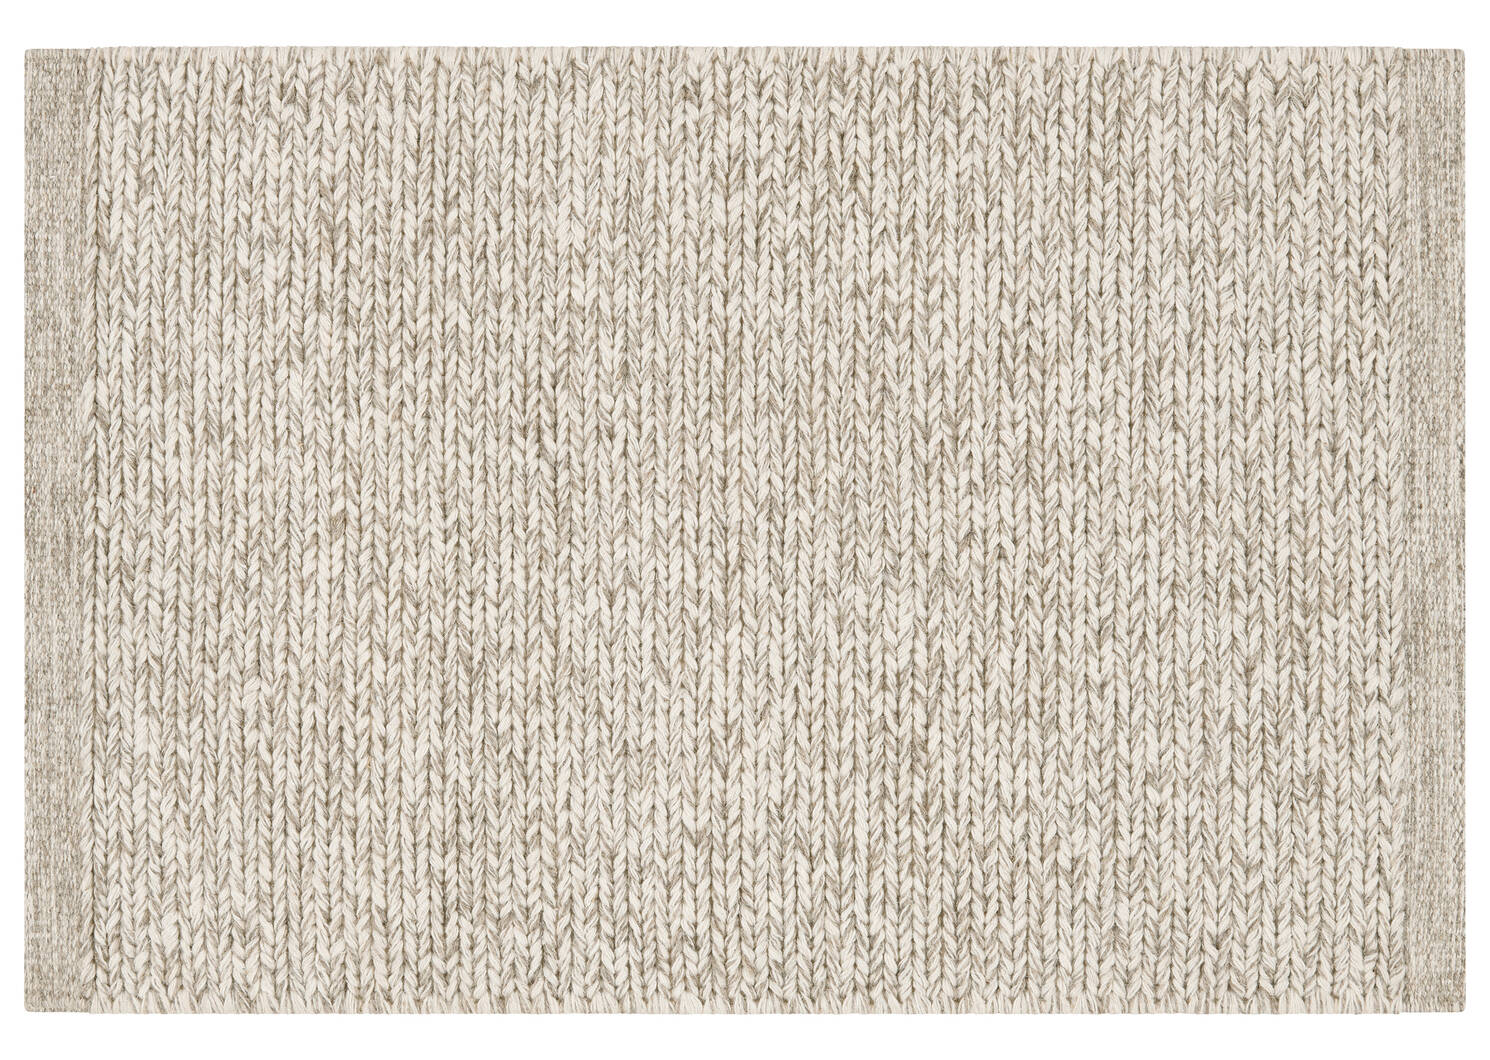 Cosette Accent Rug 24x36 Ivory/Natural